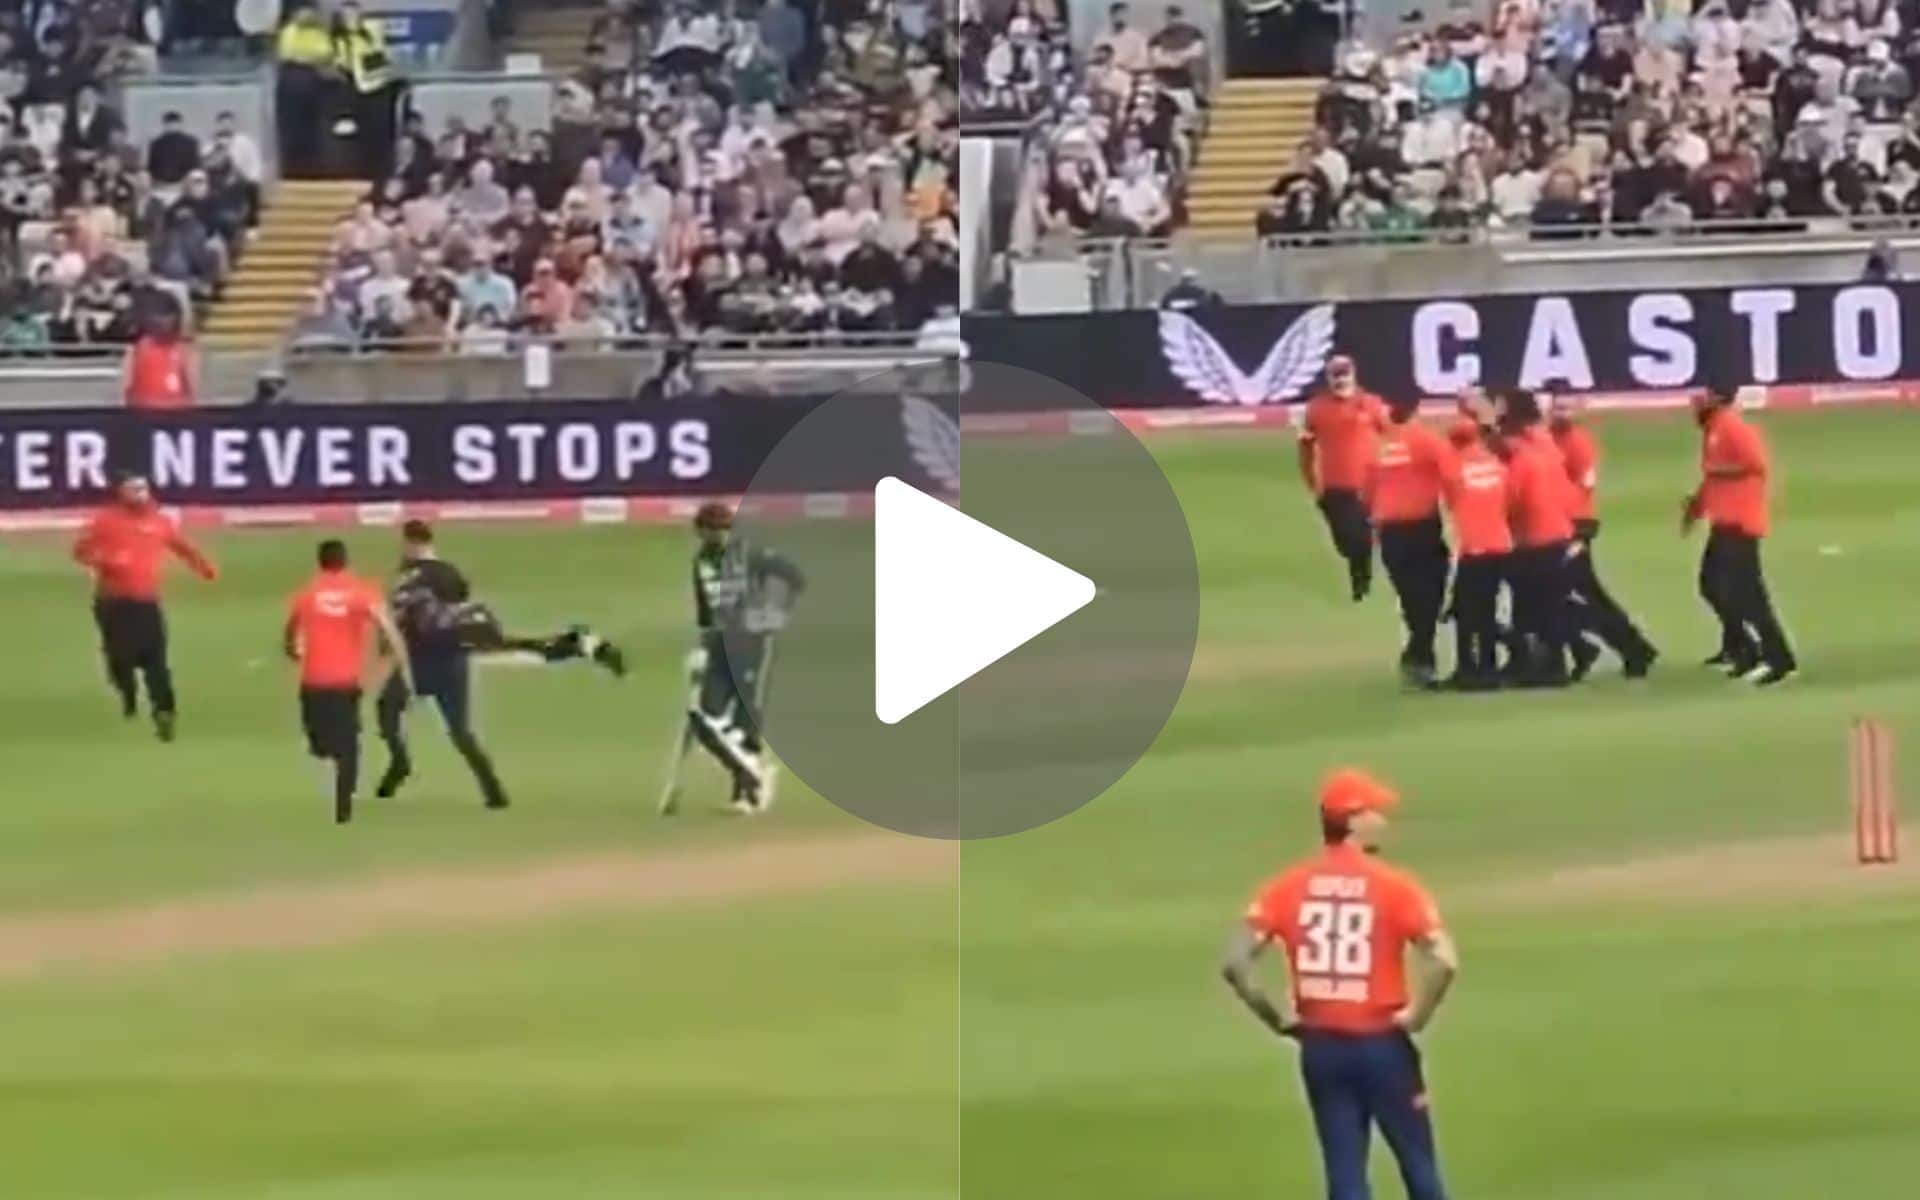 [Watch] ENG-PAK 2nd T20I Halted By Pitch Invader Carrying Palestine Flag In Birmingham